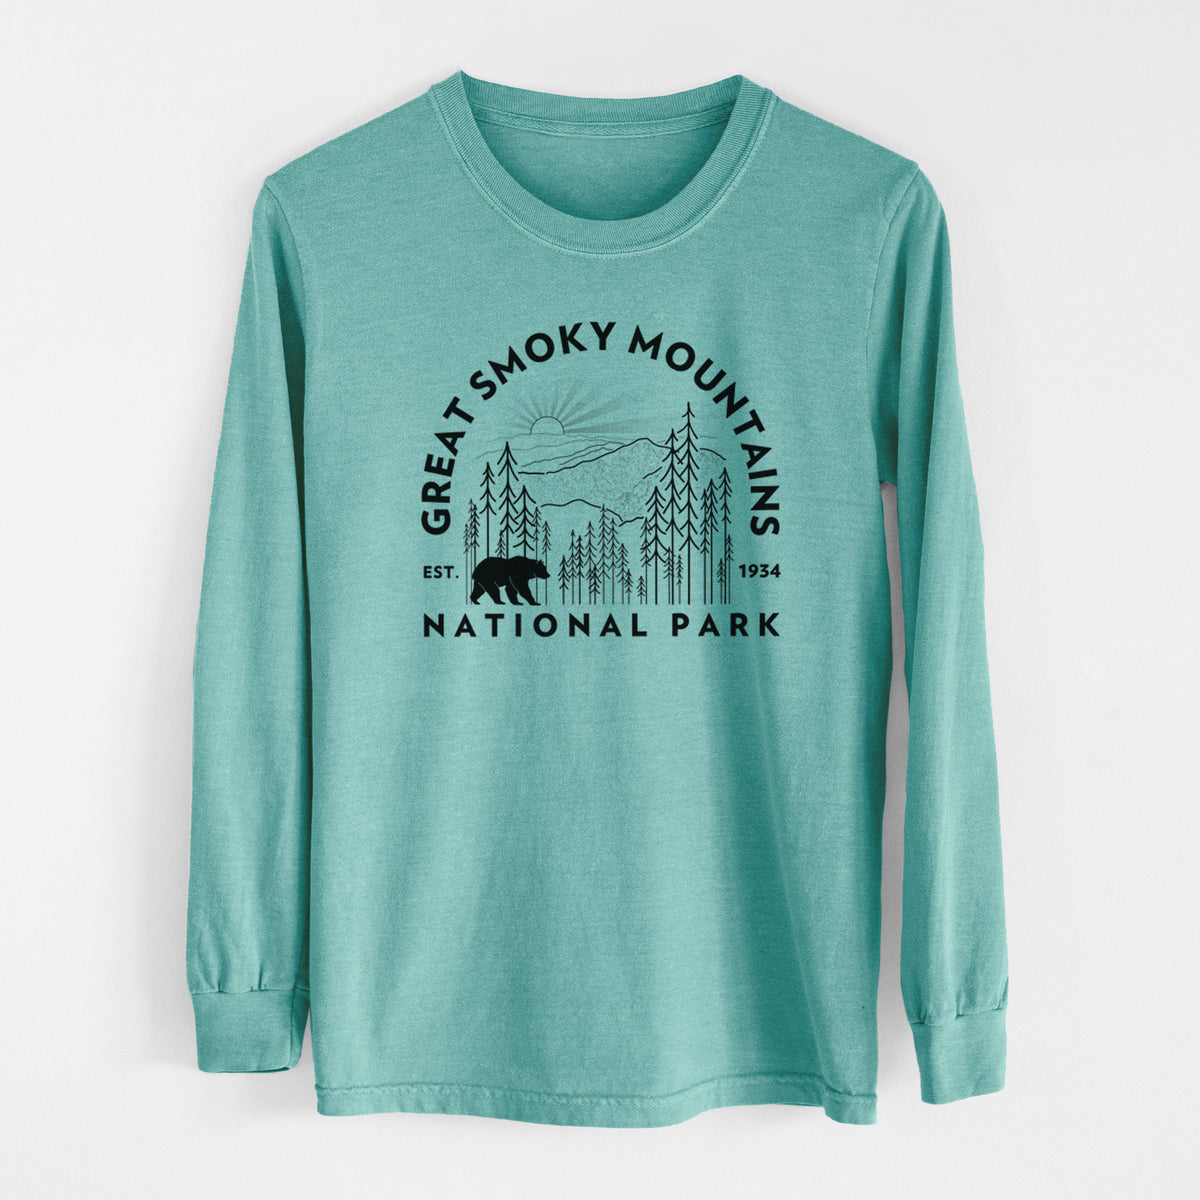 Great Smoky Mountains National Park - Heavyweight 100% Cotton Long Sleeve